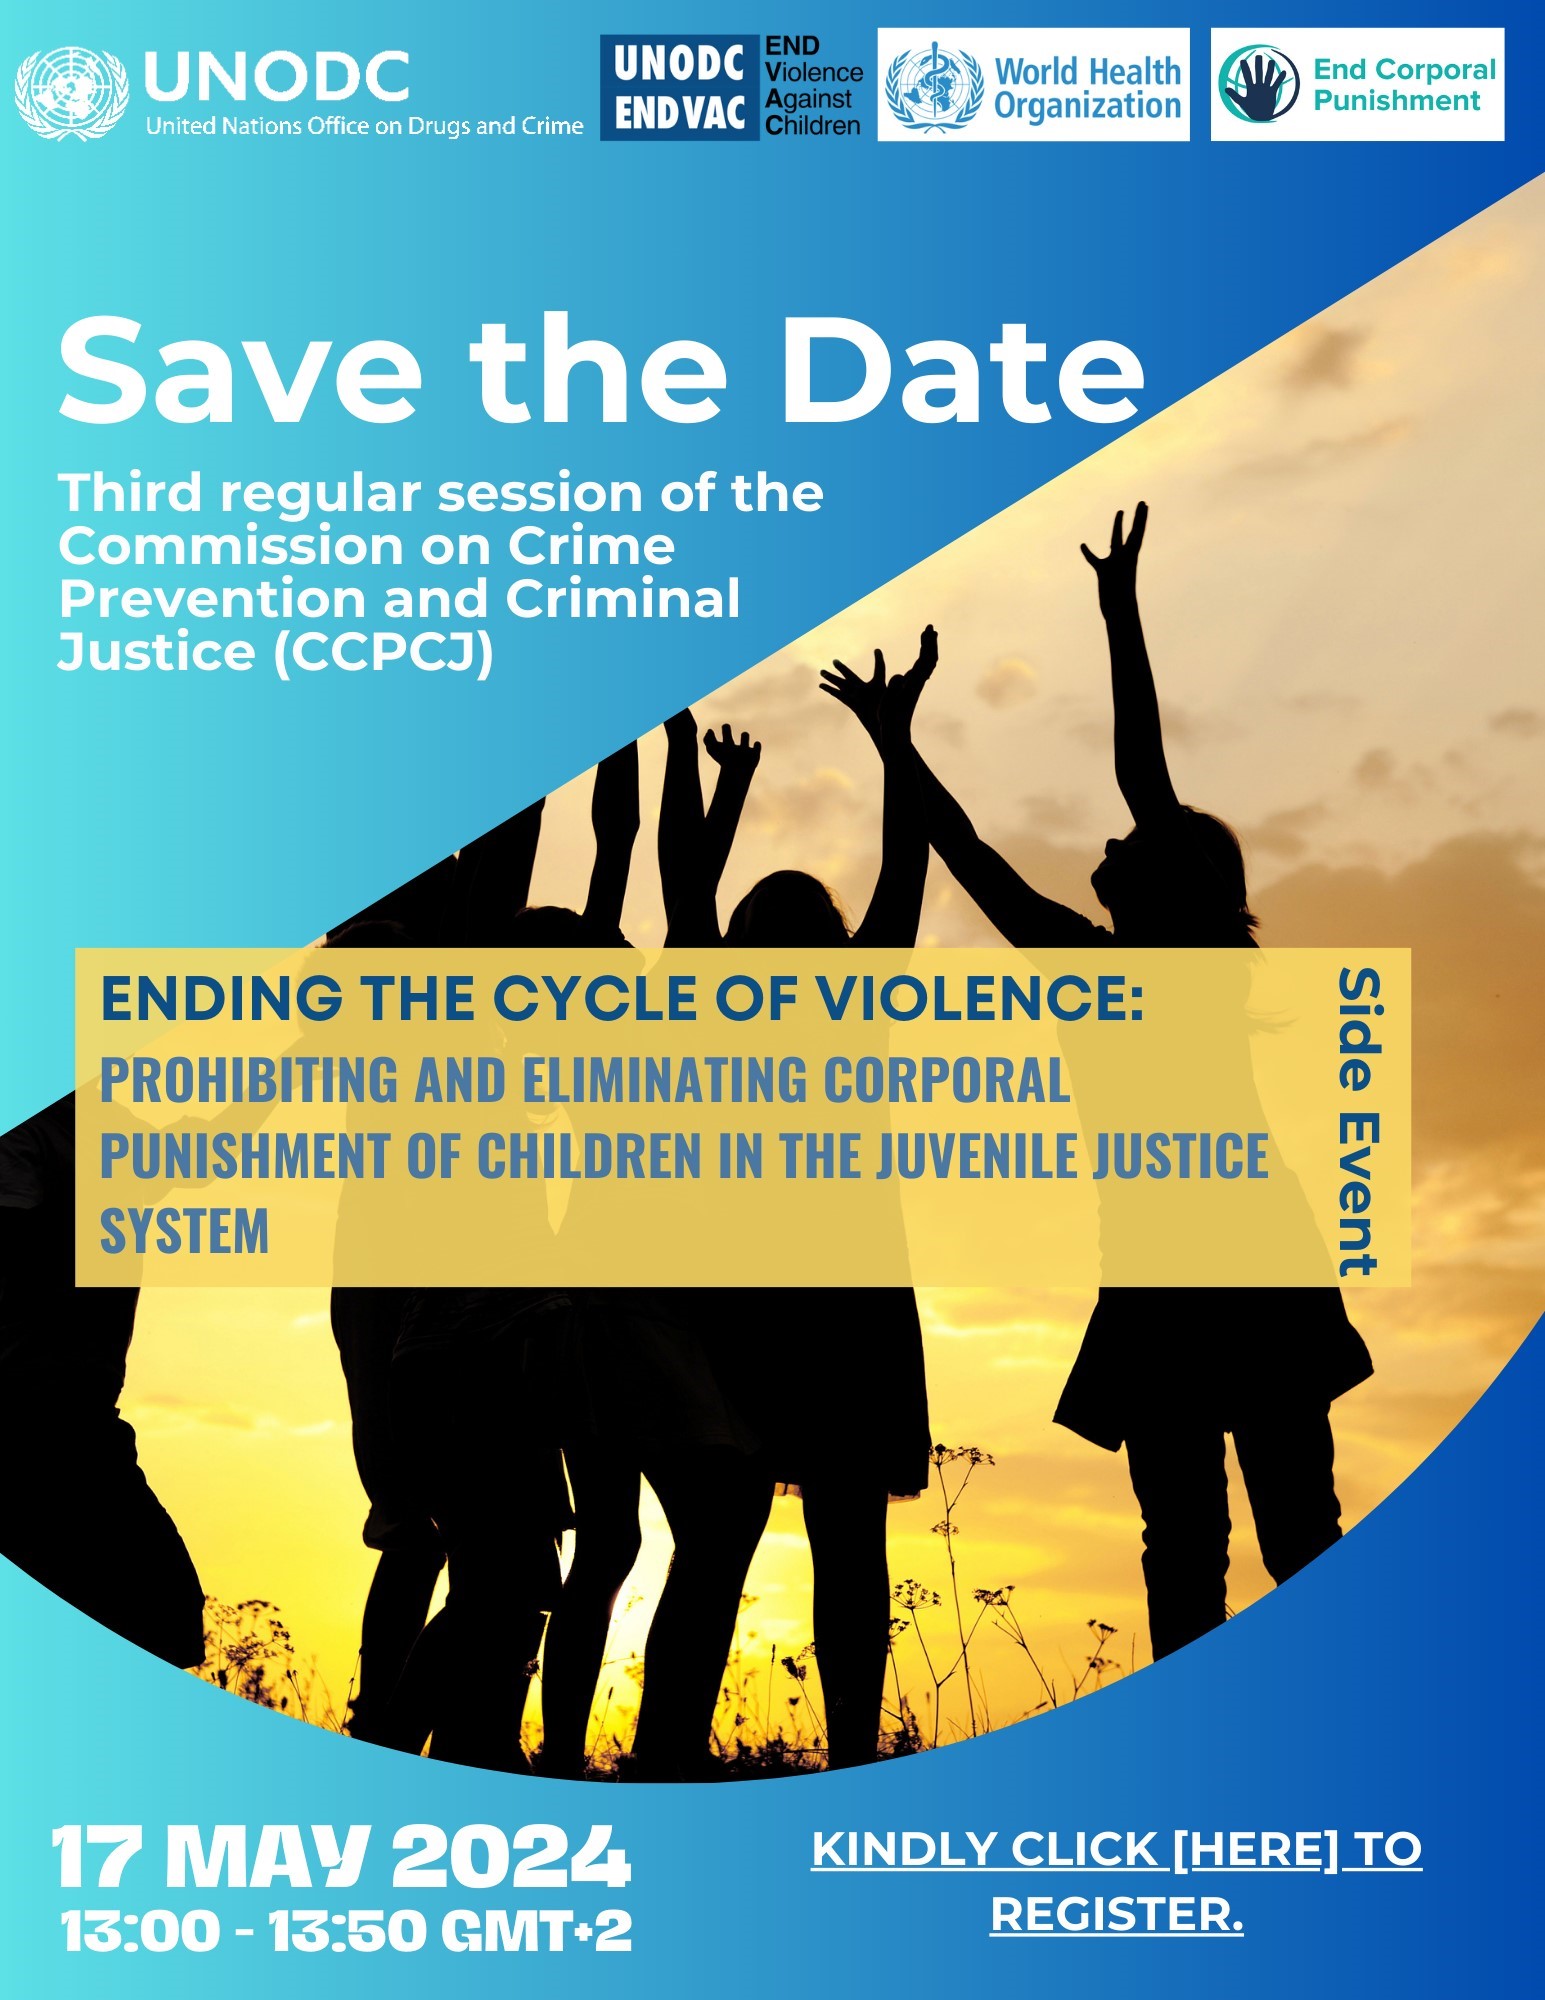 Ending the Cycle of Violence: Prohibiting and Eliminating Corporal Punishment of Children in the child (Juvenile) Justice System